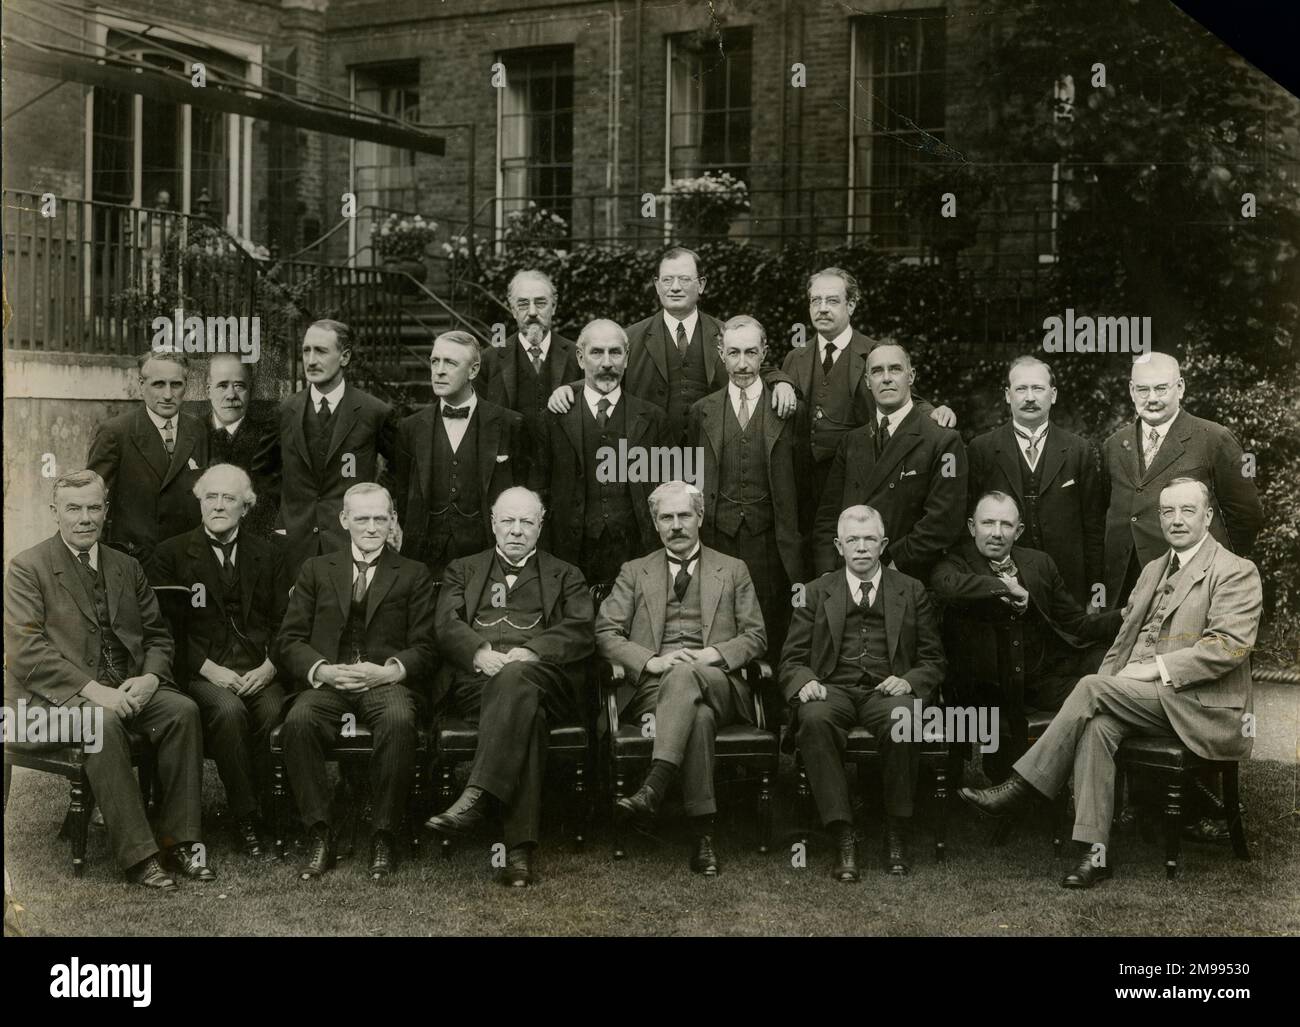 Group photo, Ramsay MacDonald's Cabinet in the first Labour Government. Front row (left to right): Adamson, Lord Parmoor, Snowden, Lord Haldane, MacDonald, Clynes, Thomas, Henderson. Second row: Trevelyan, Walsh, Lord Thomson, Lord Chelmsford, Olivier, Buxton, Wedgwood, Hartshorn, Shaw. Back row: Webb, Wheatley, Jowett. Stock Photo